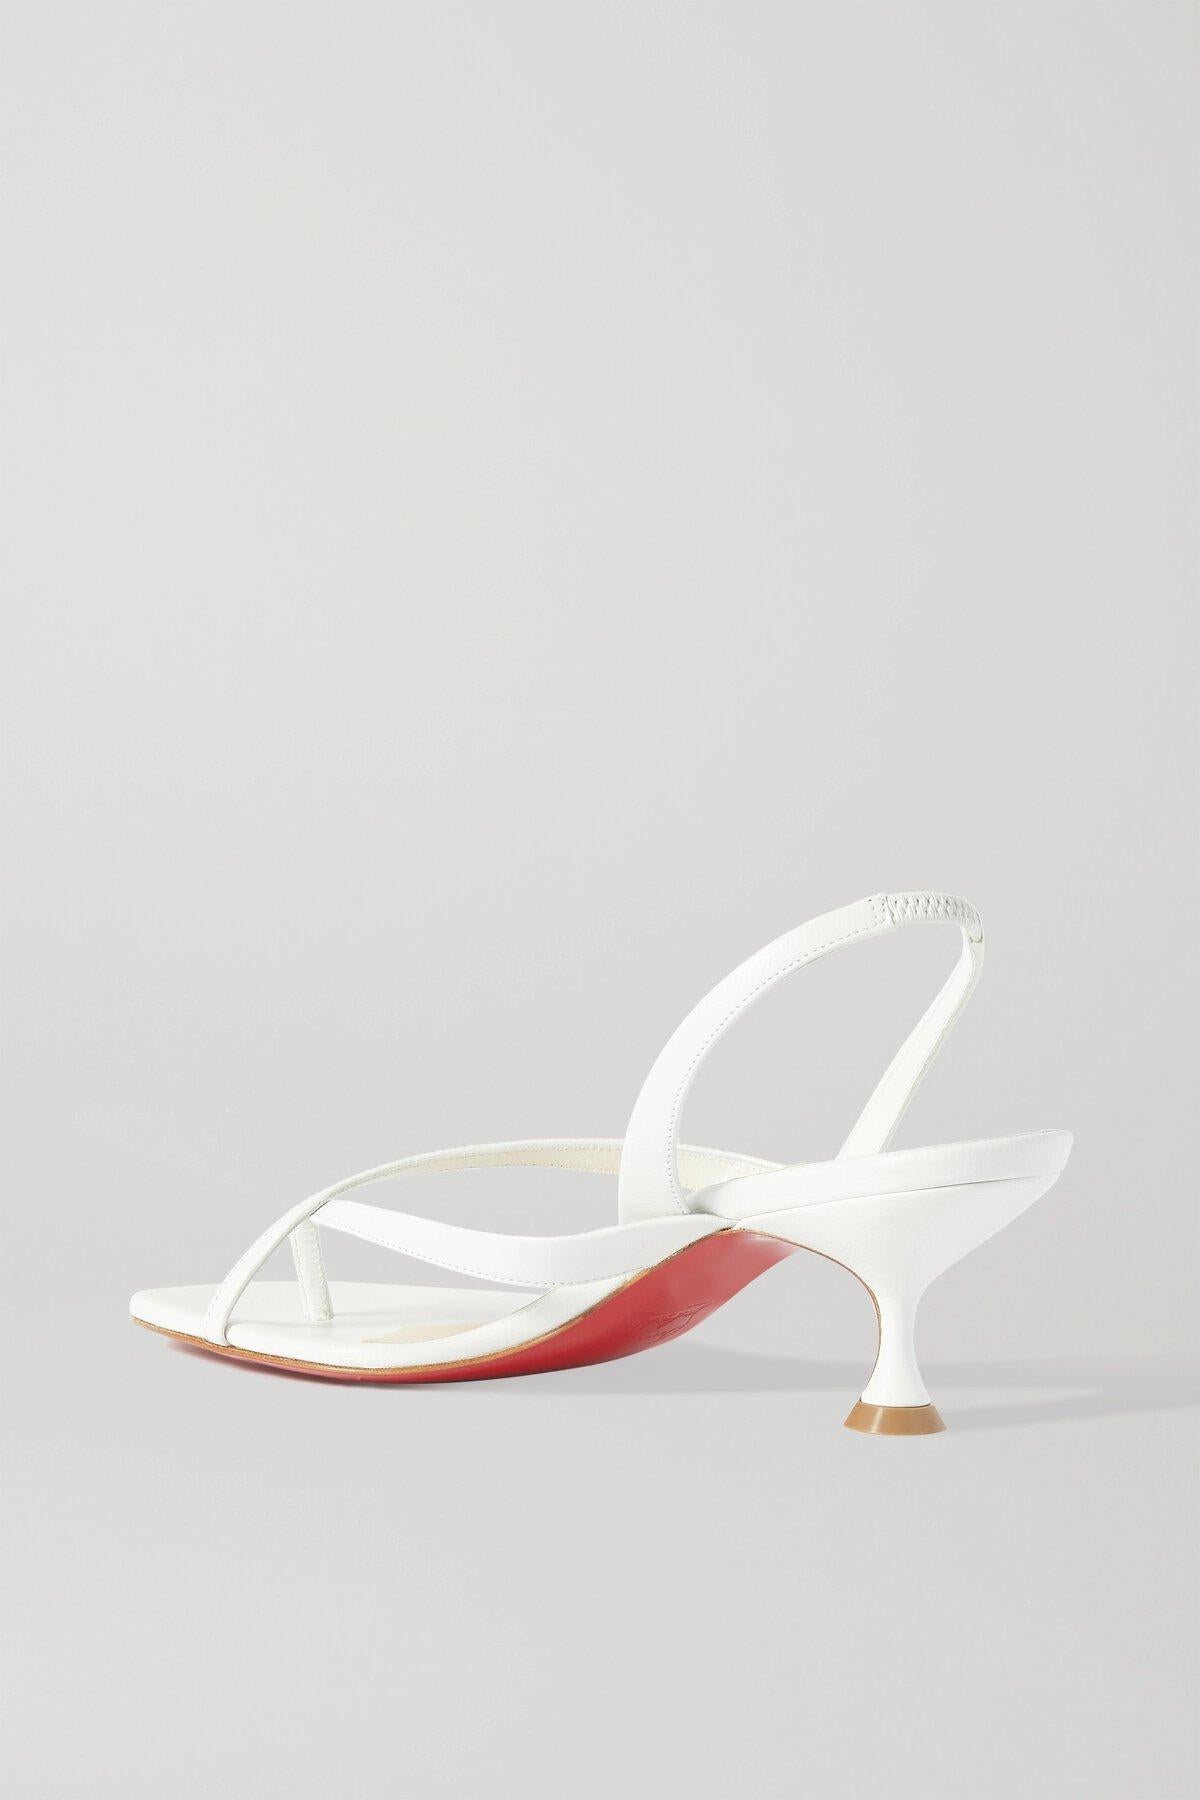 Christian Louboutin's retro 'Taralita' sandals have been made in Italy from soft strips of leather that elegantly cross at the front. They're set on a slightly flared kitten heel and lacquered in the iconic red hue at the glossy soles. The slingback